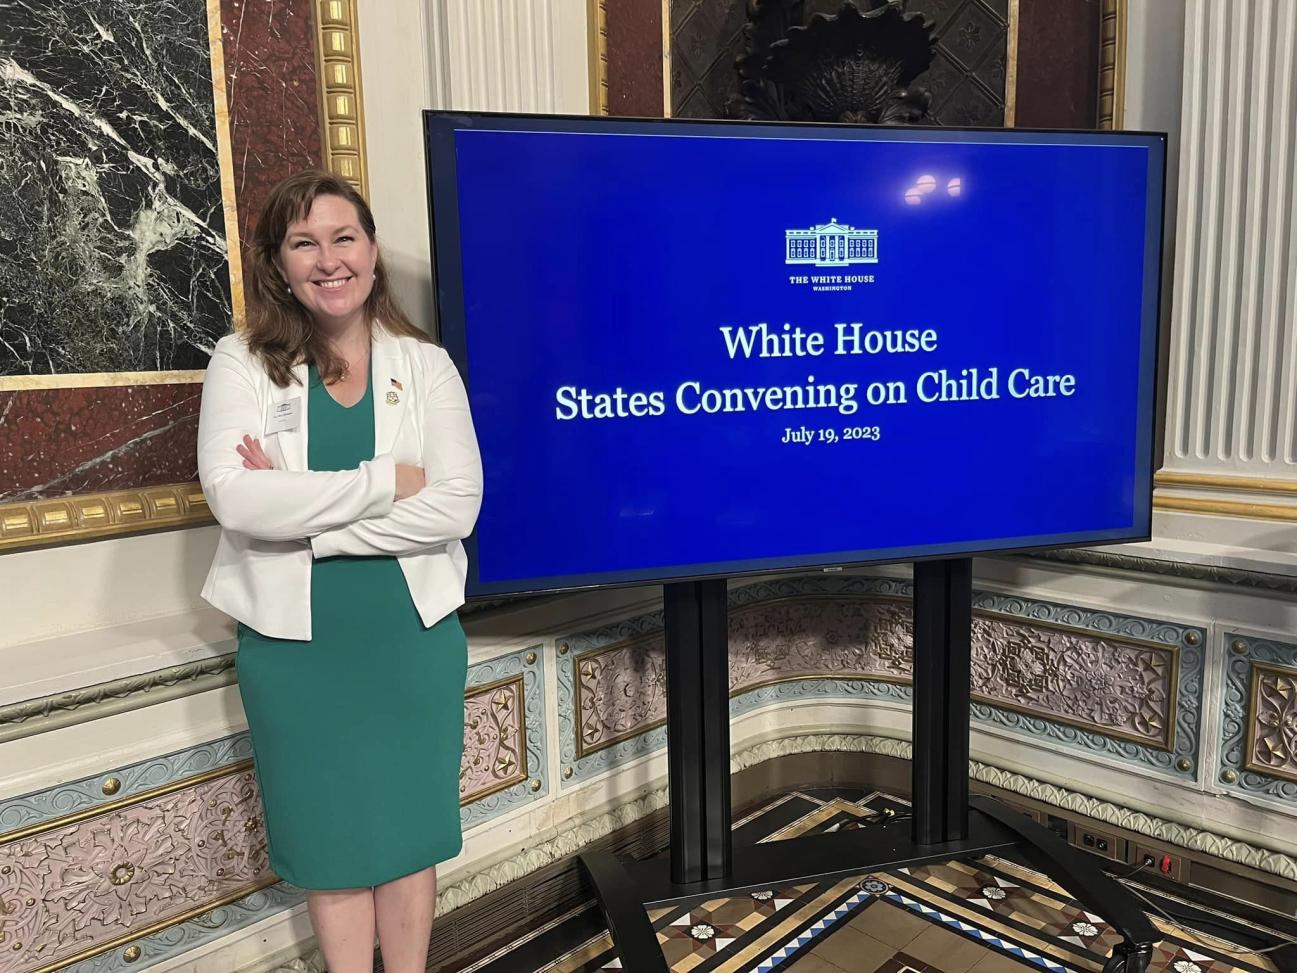 I was honored to participate in a discussion at the White House on Wednesday to discuss how Connecticut is improving child care.